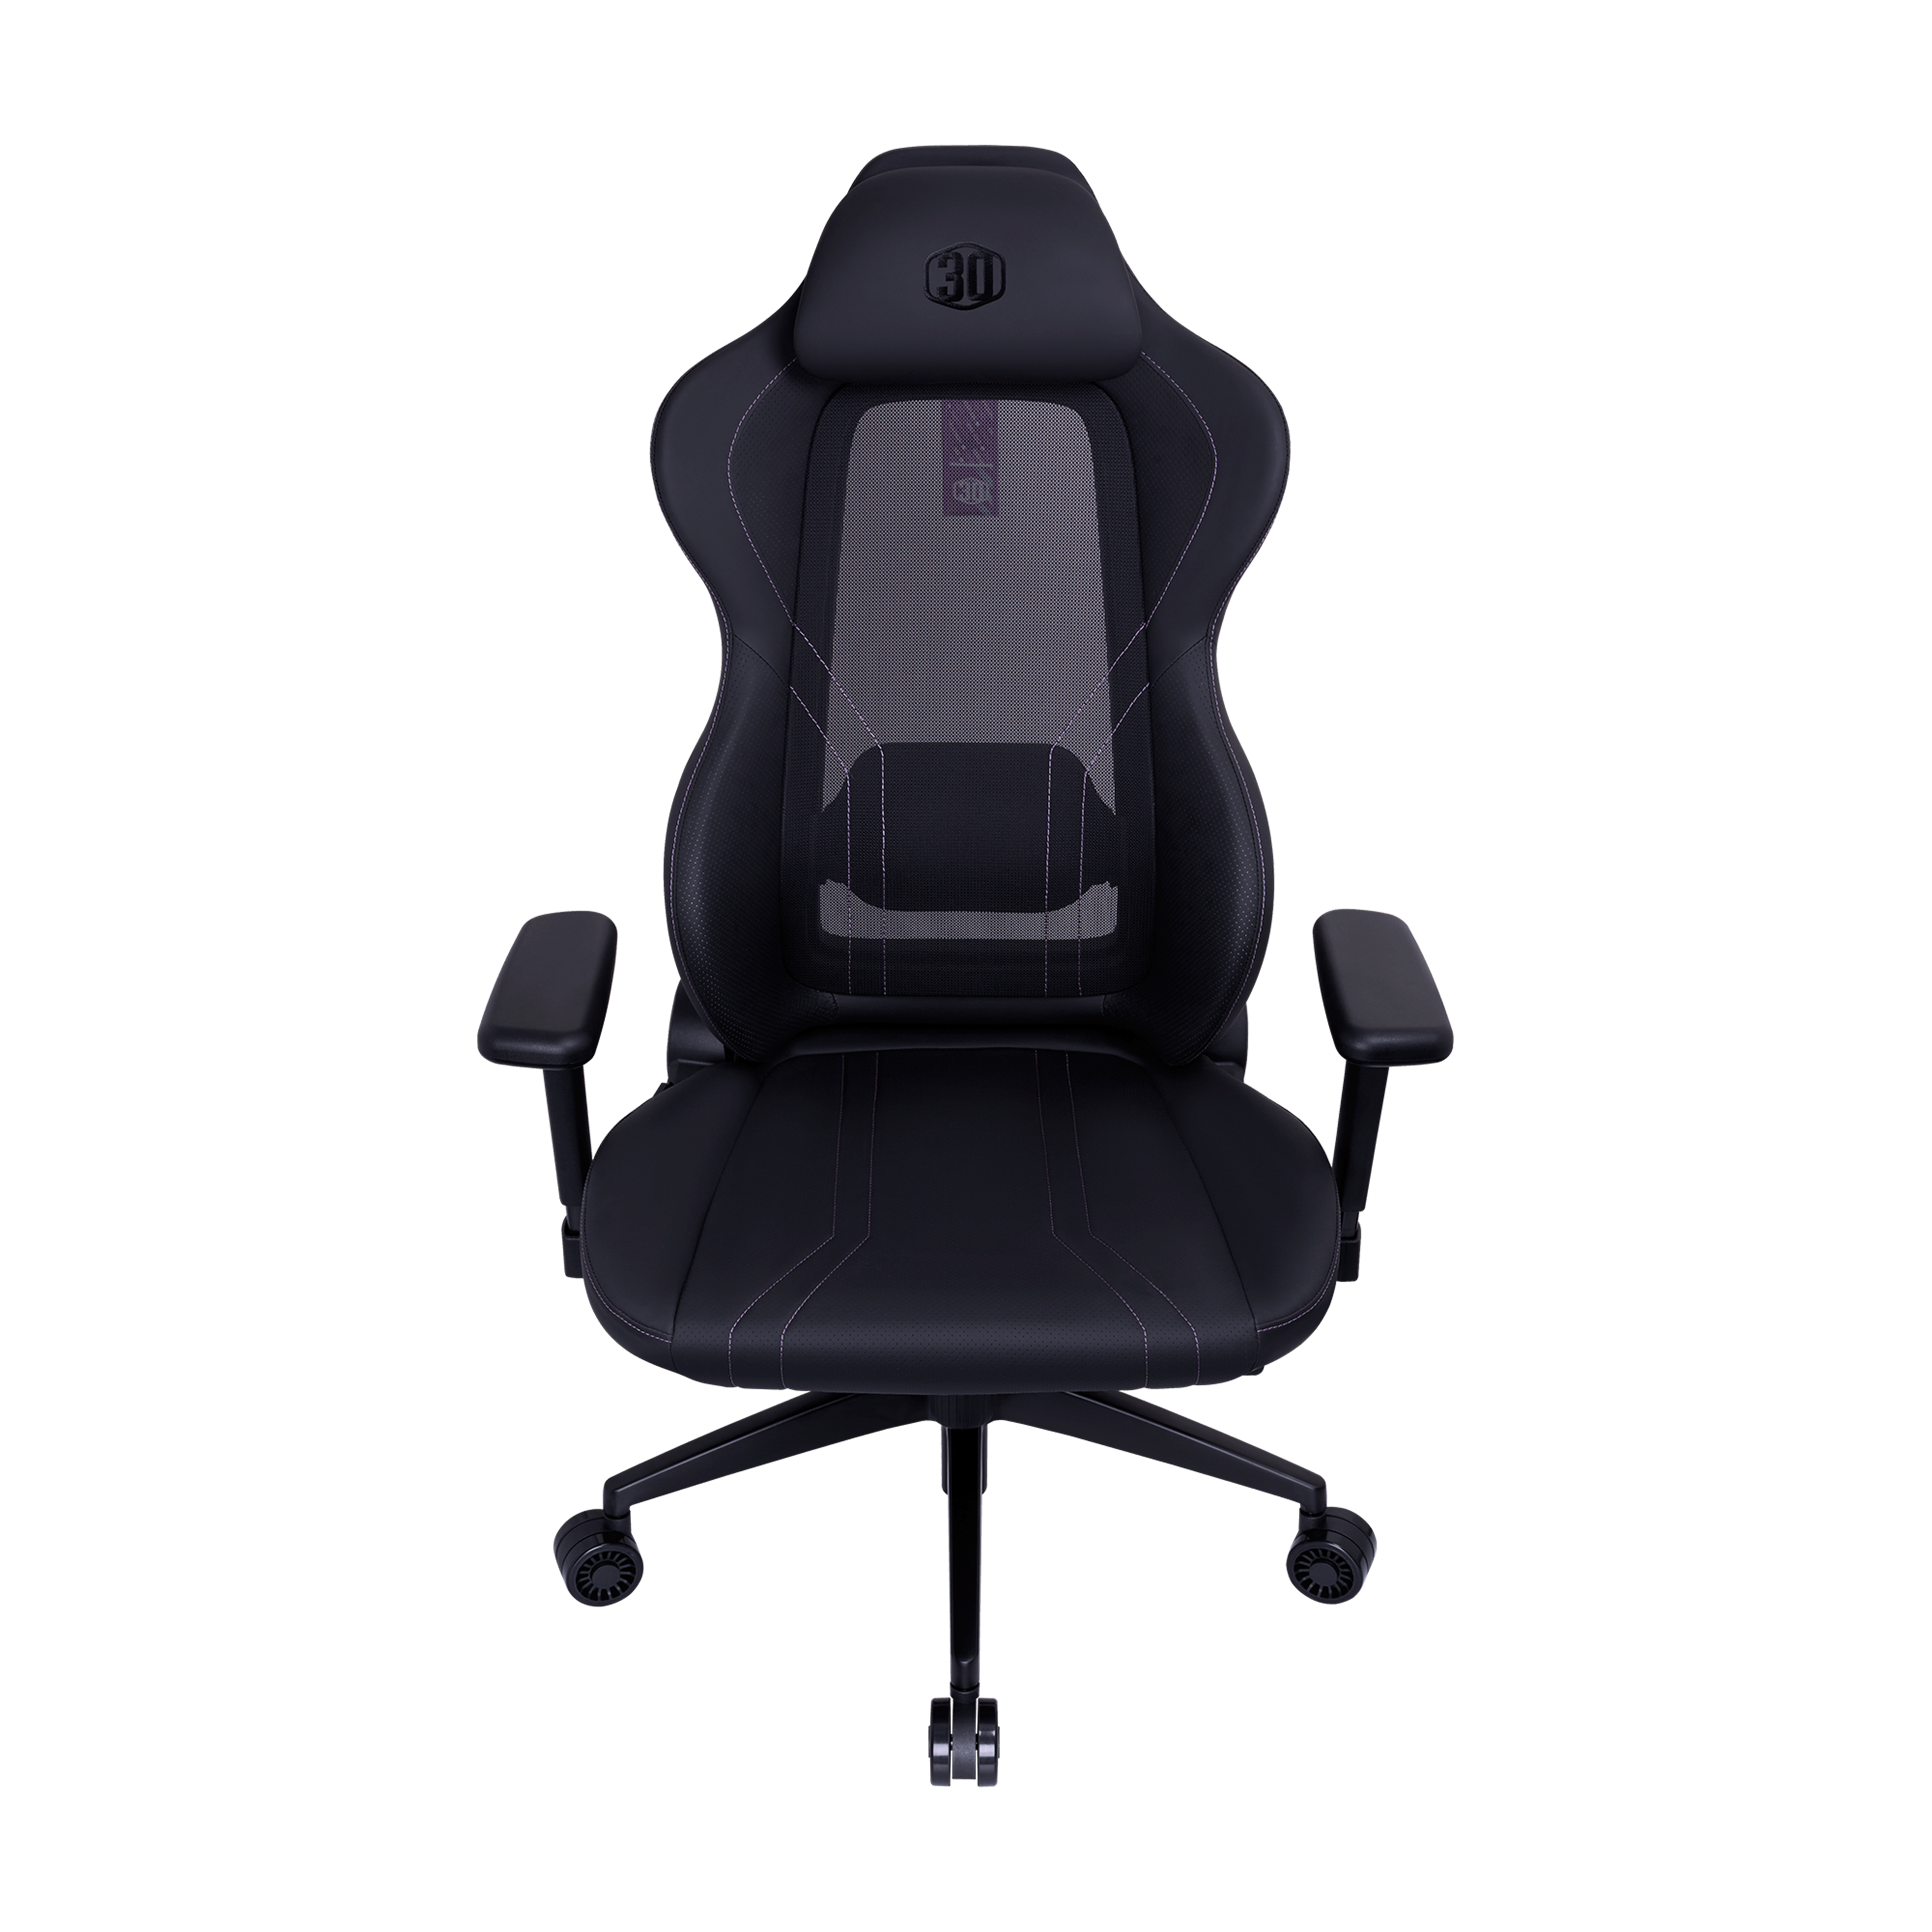 Cooler Master Hybrid 1 Ergo Gaming Chair Review - IGN